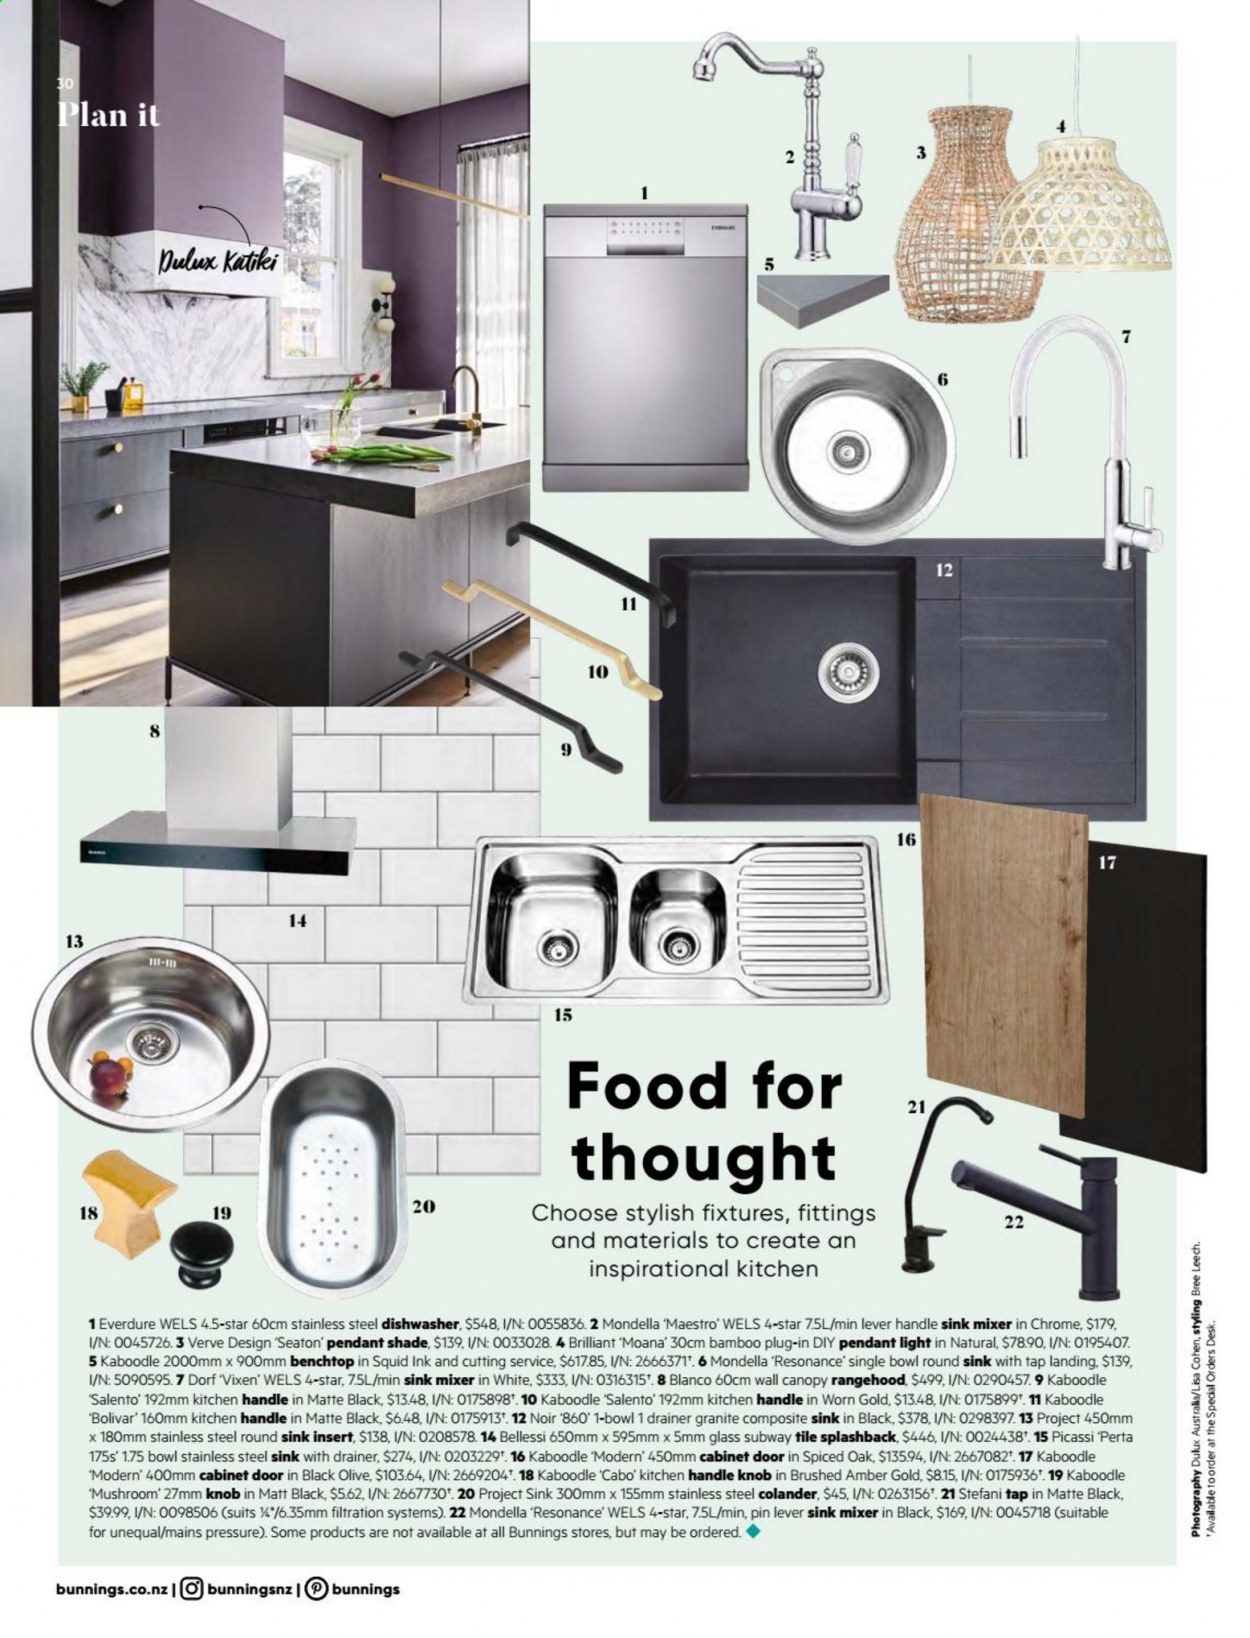 thumbnail - Bunnings Warehouse mailer - Sales products - cabinet, sink, stainless steel sink, dishwasher, Dulux, door. Page 30.